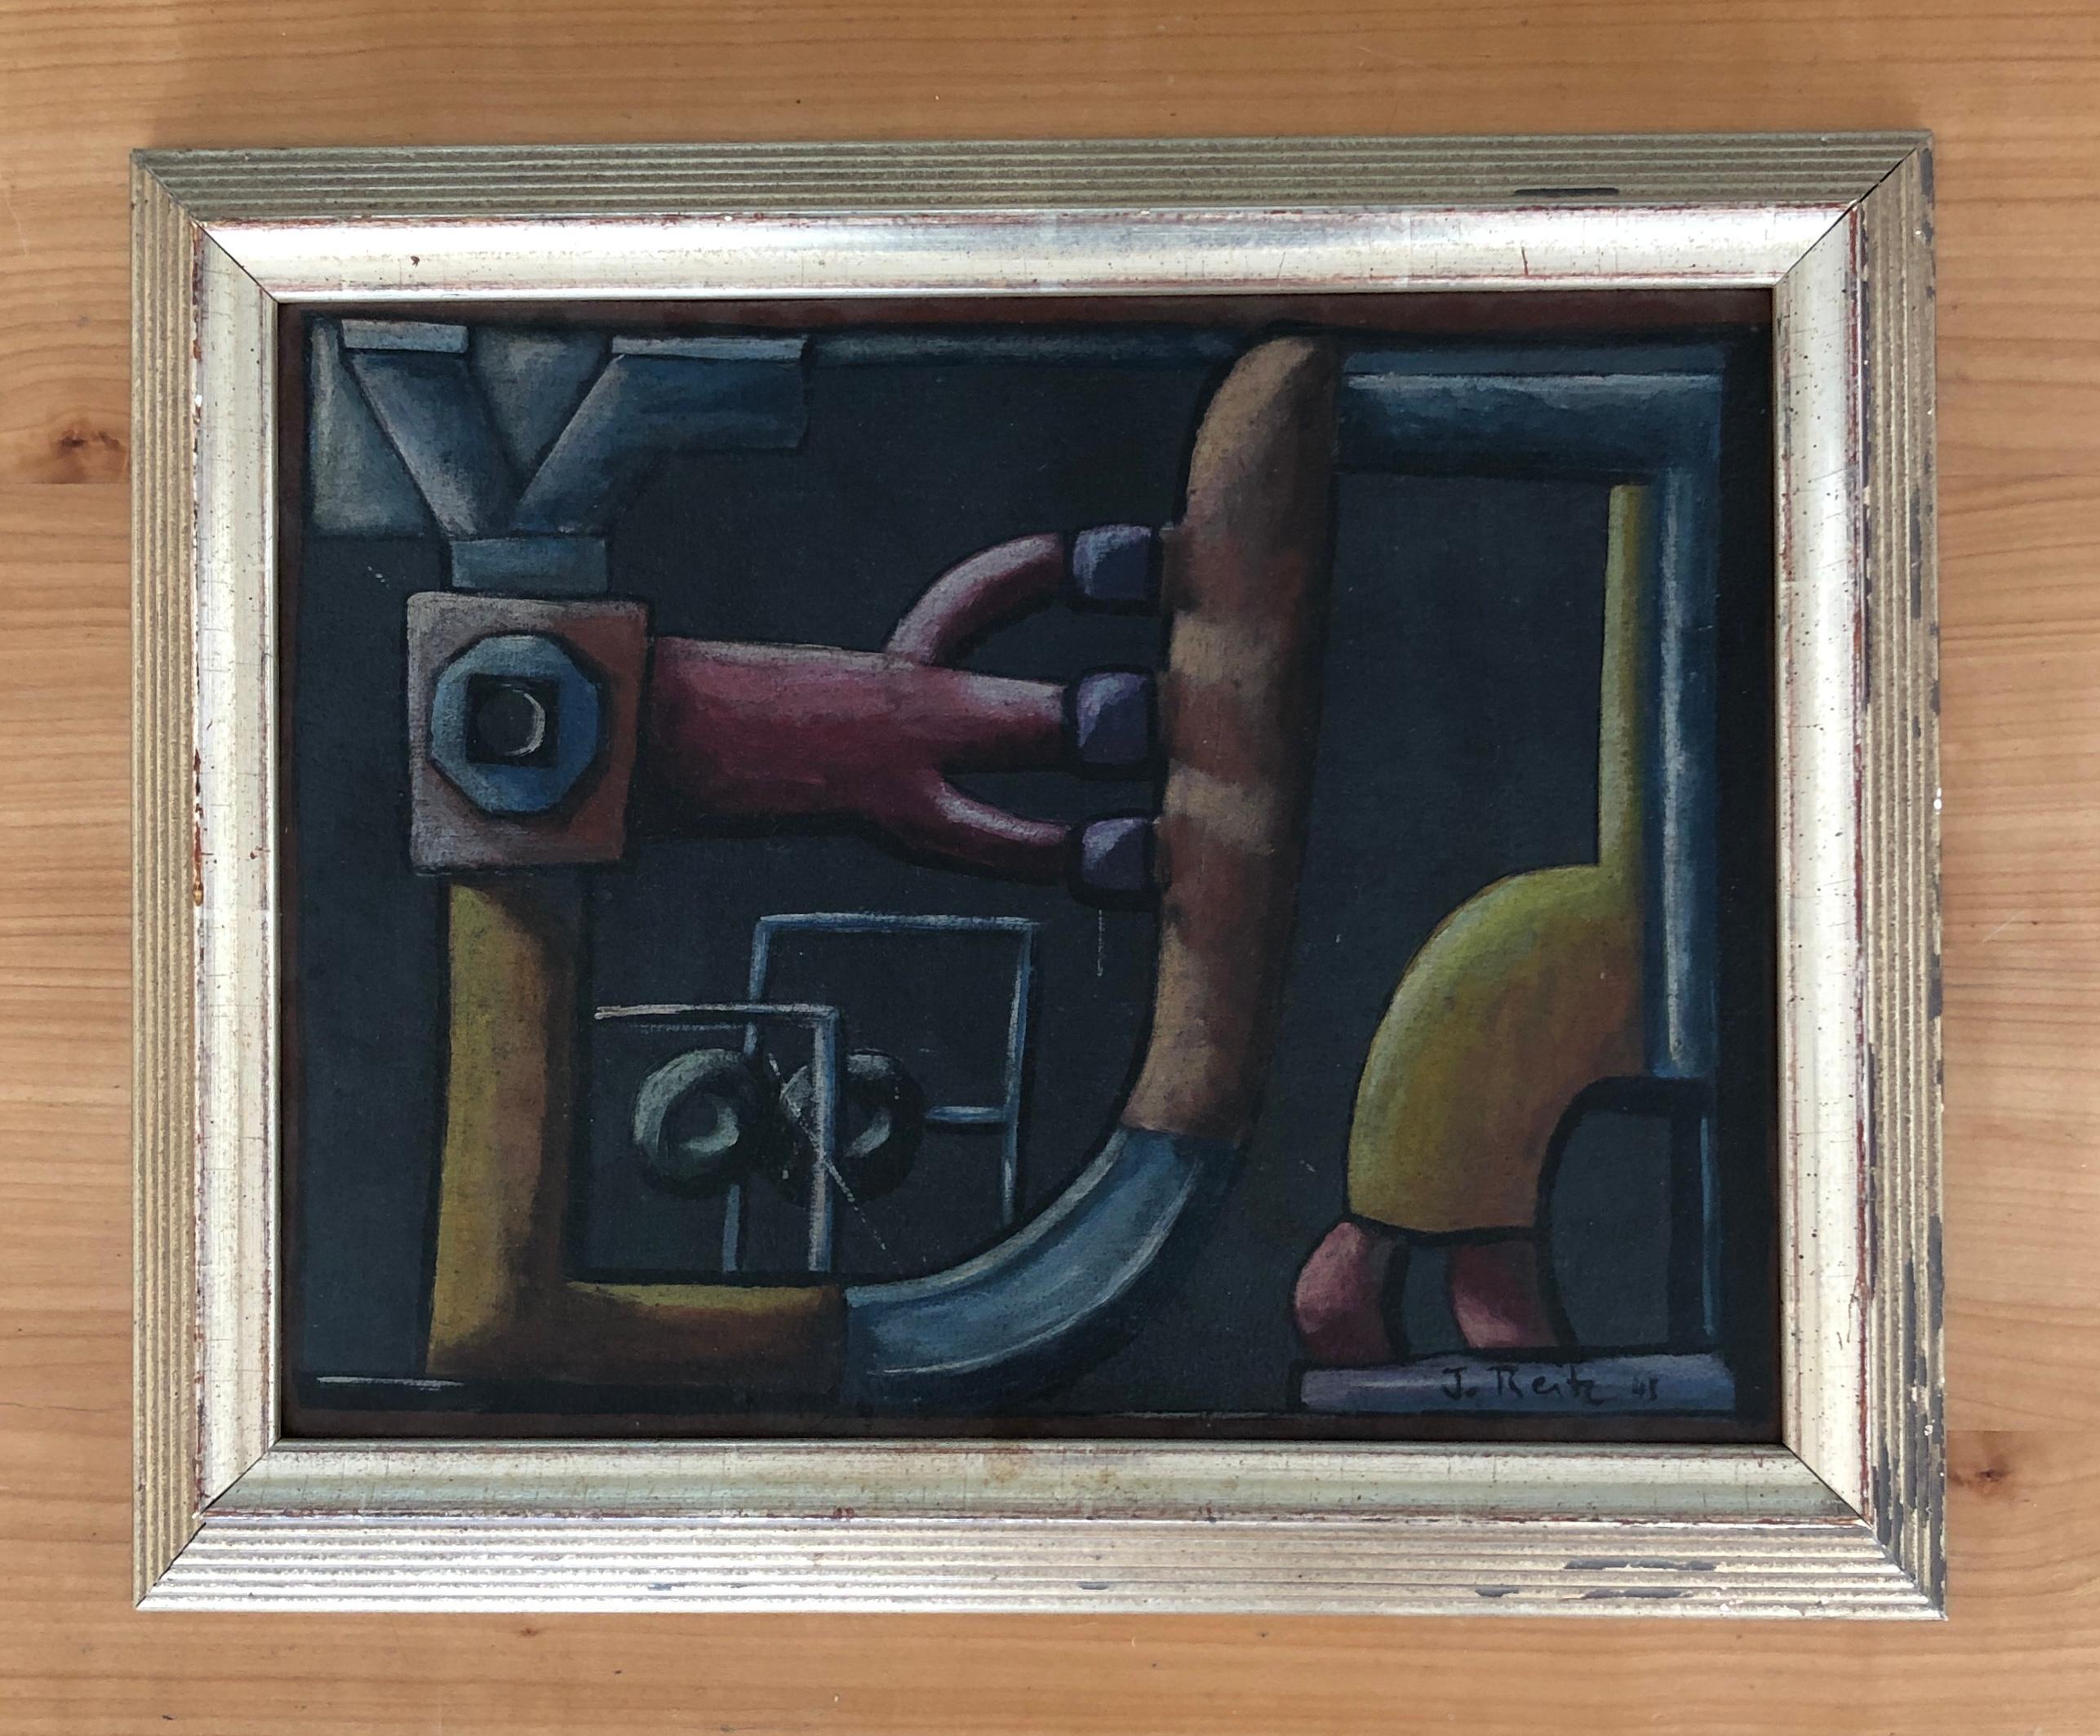 Composition to machines and tools - Painting by John Reitz